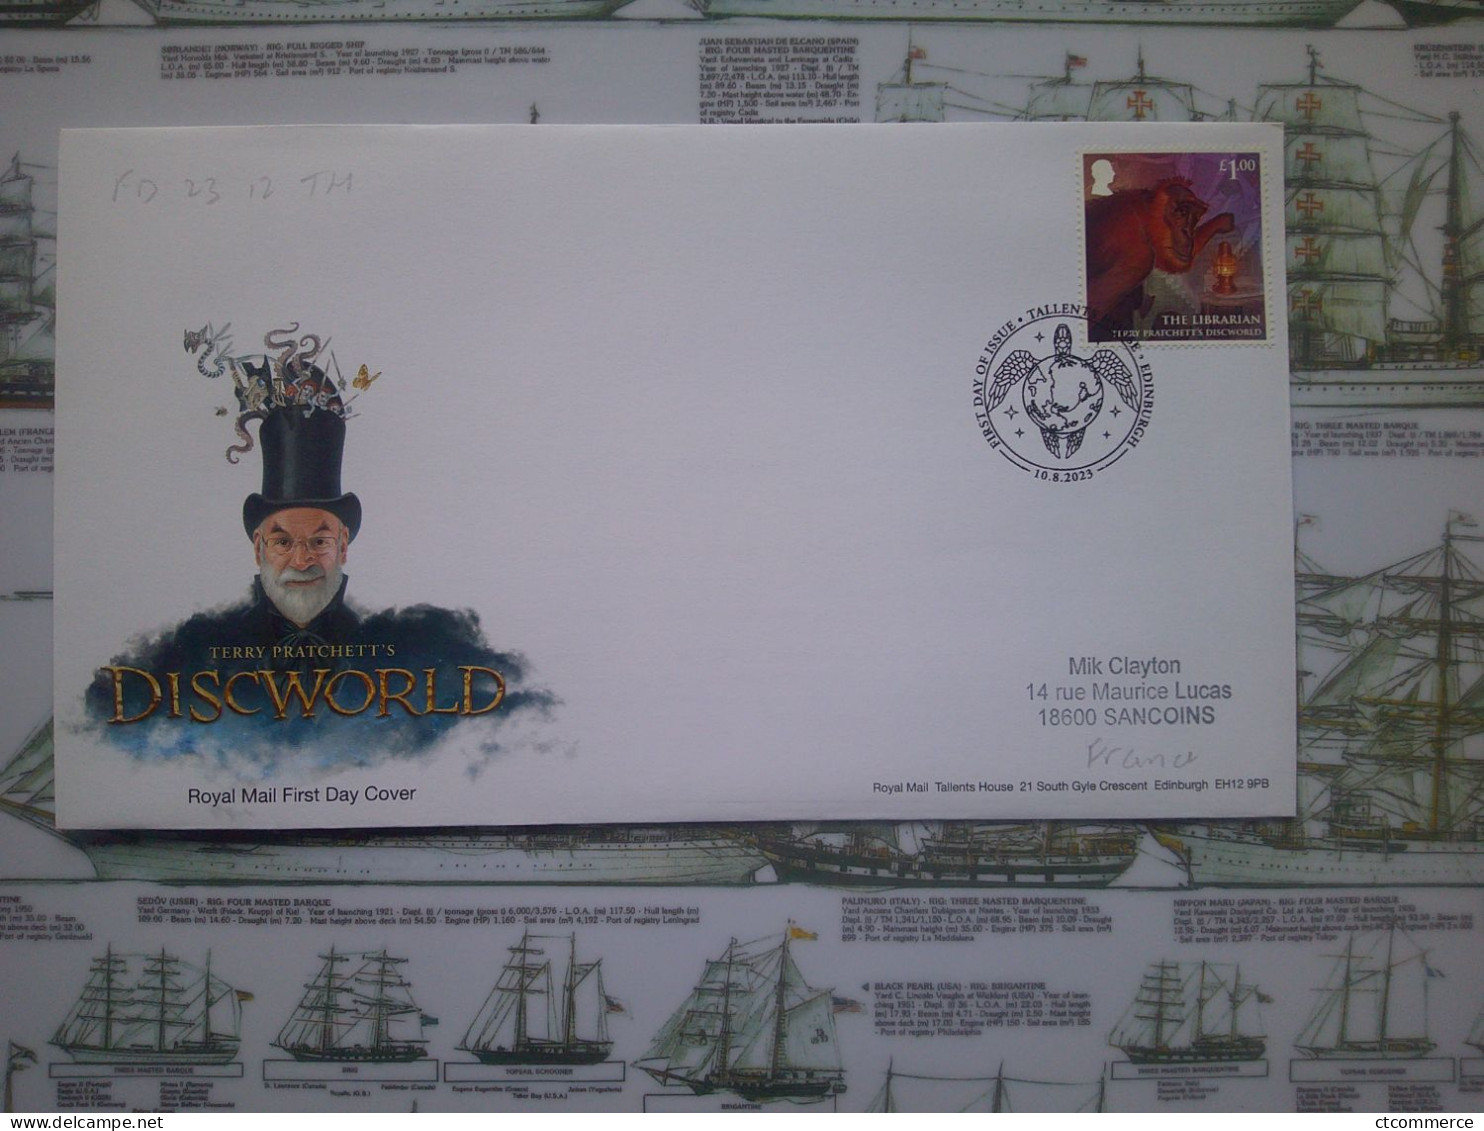 2023 FDC Terry Pratchett's Disc World, The Librarian - 2011-2020 Decimal Issues